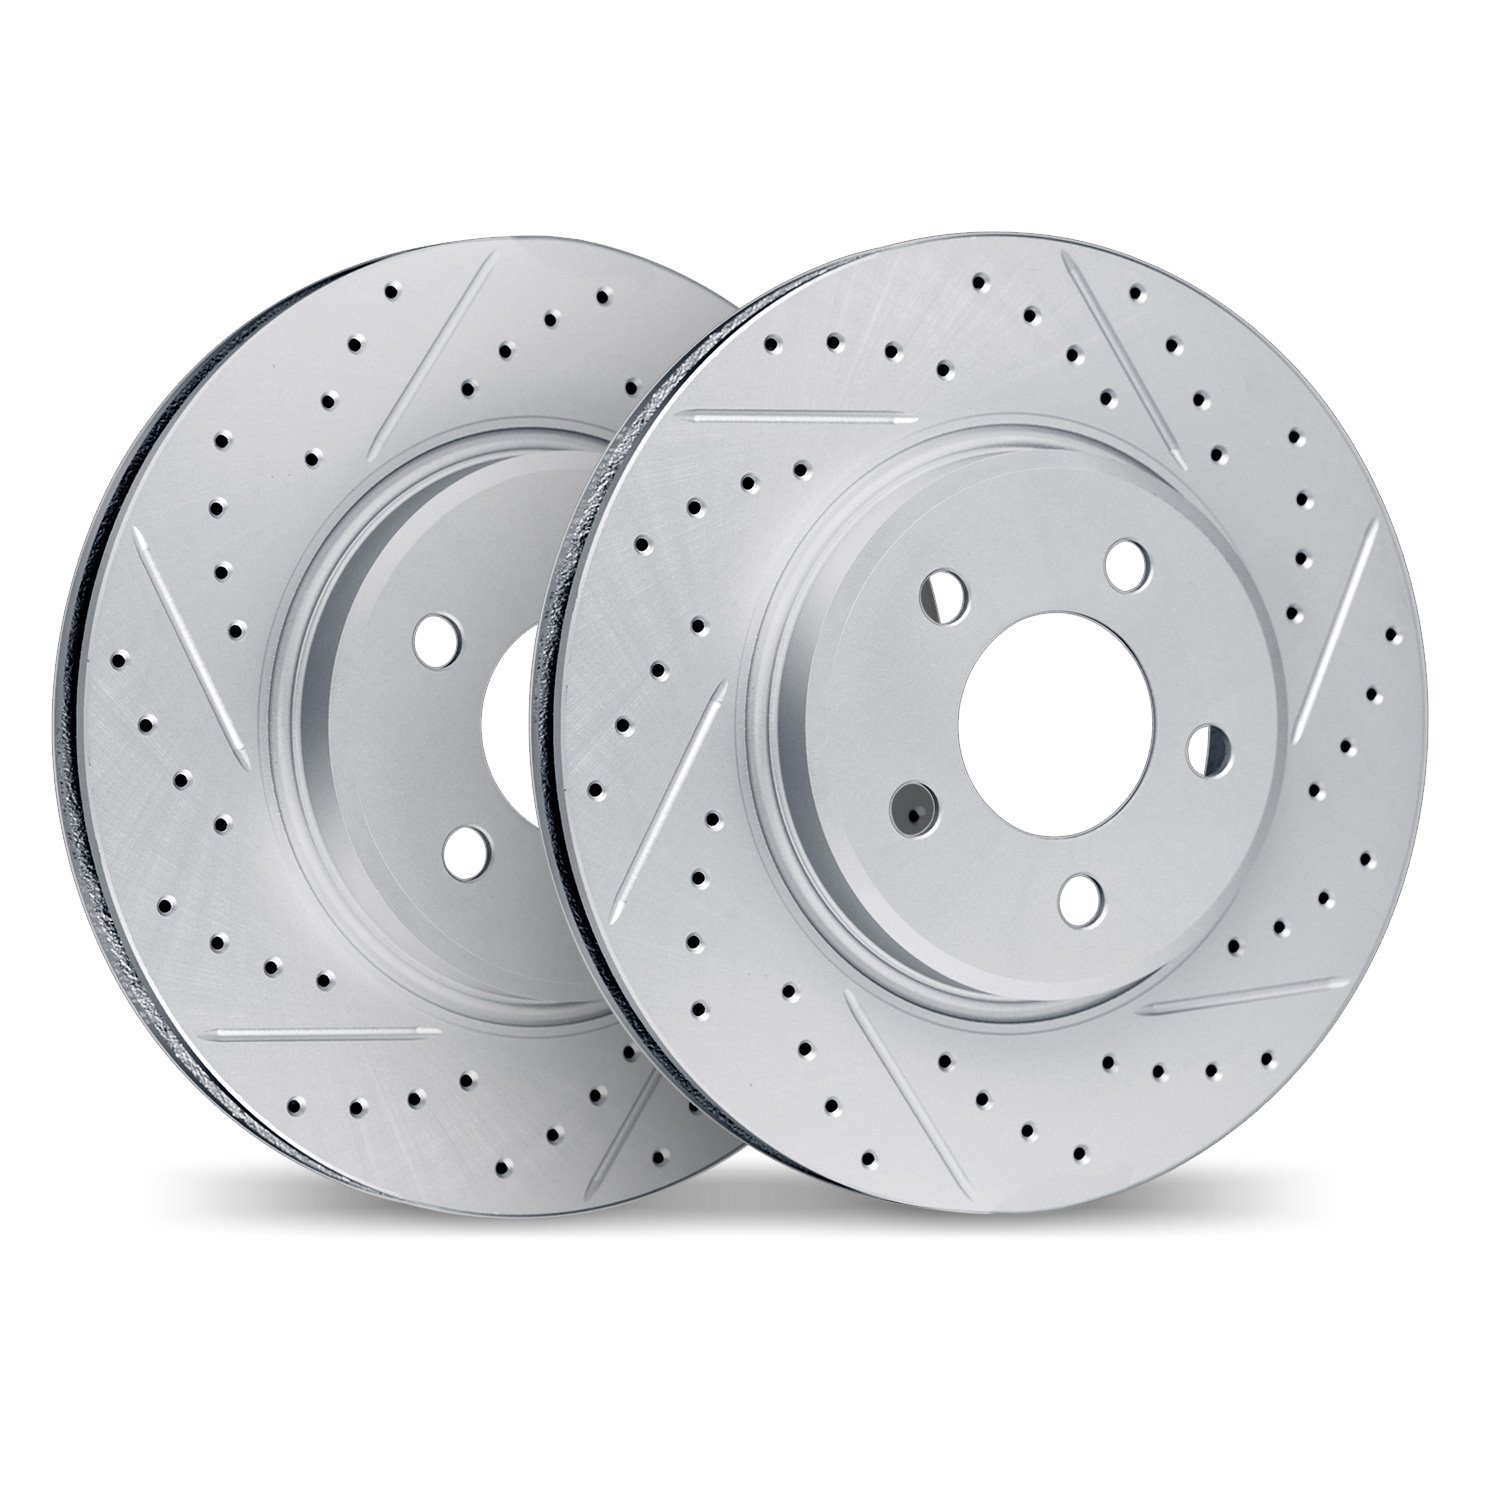 2002-11006 Geoperformance Drilled/Slotted Brake Rotors, 2002-2005 Land Rover, Position: Front